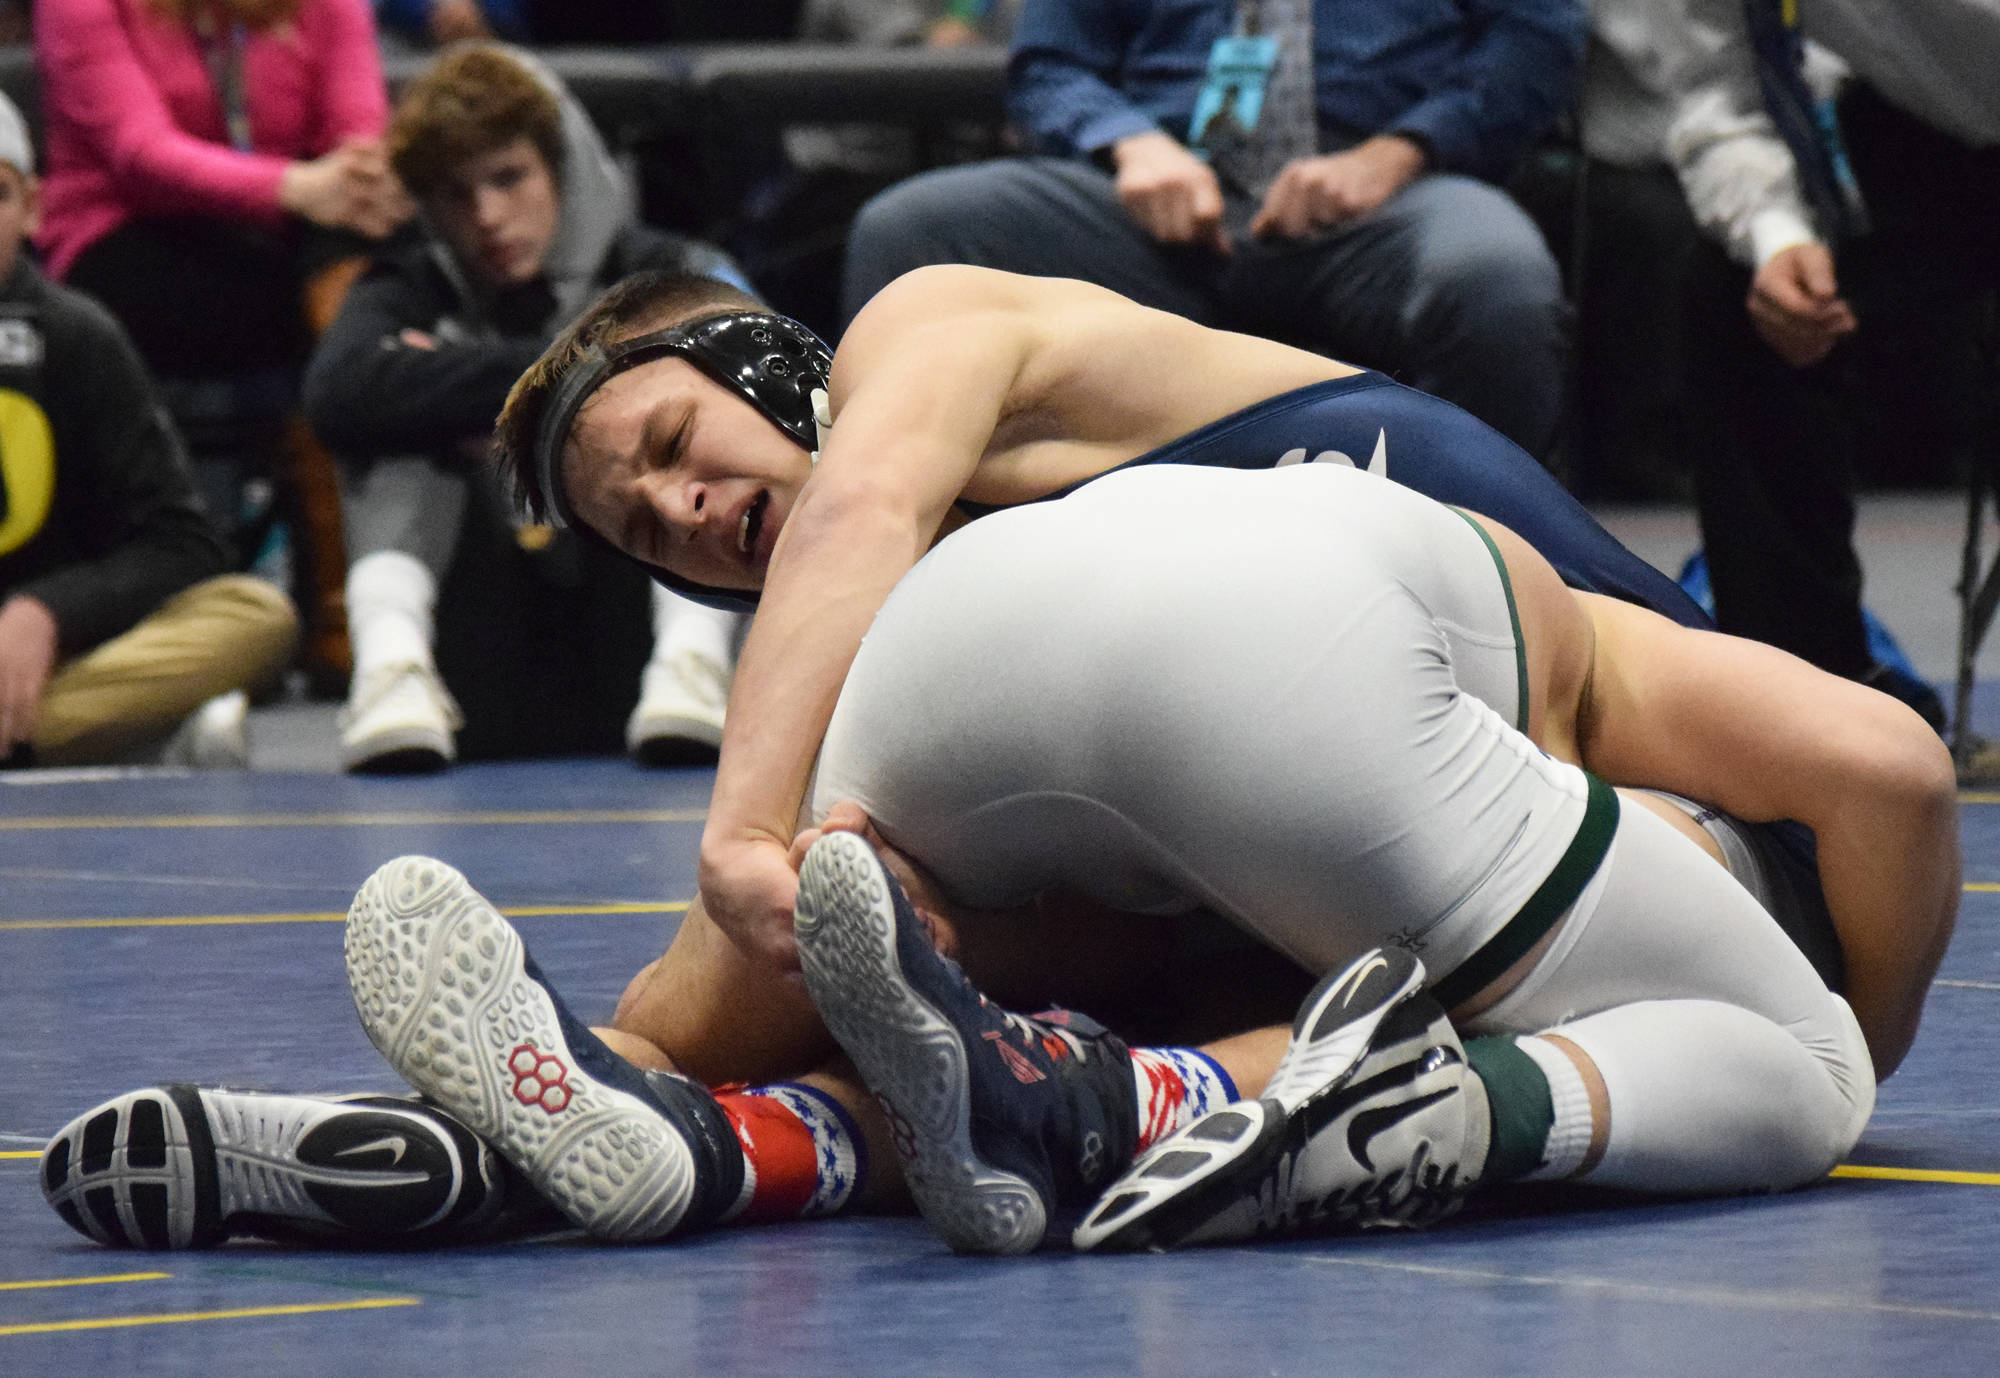 Soldotna’s Dennis Taylor battles Colony’s Vincent Cramer in the Division I boys 152-pound final Saturday, Dec. 21, 2019, at the ASAA State Wrestling Championships at the Alaska Airlines Center in Anchorage, Alaska. (Photo by Joey Klecka/Peninsula Clarion)